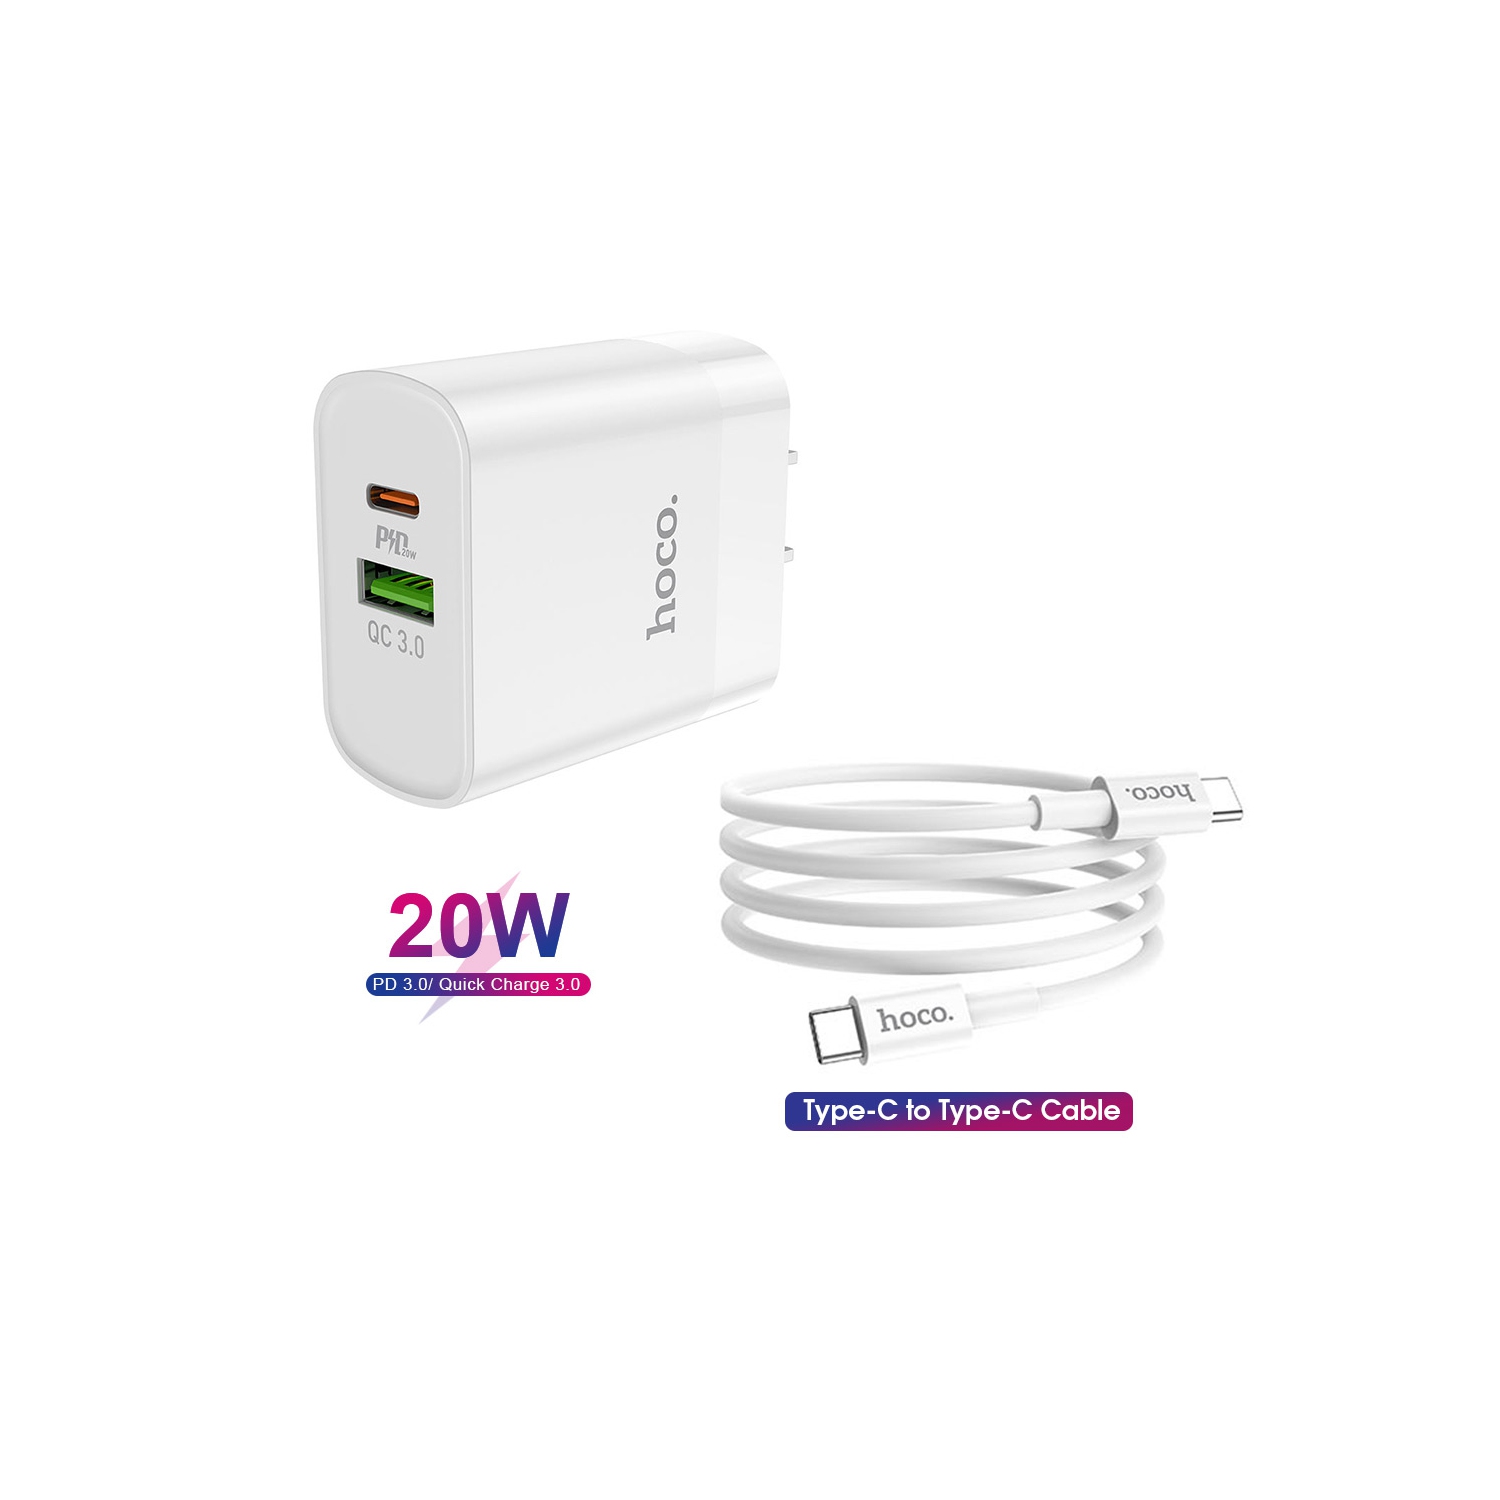 20W Type Dual Port (USB C + USB A (PD+QC 3.0) Fast Wall Charger Power Adapter & Type-C to Type-C Cable for Samsung Galaxy S21 Ultra / S21 Plus / S21 / Google Pixel 6 Pro / Google Pixel 6 / Motorola /